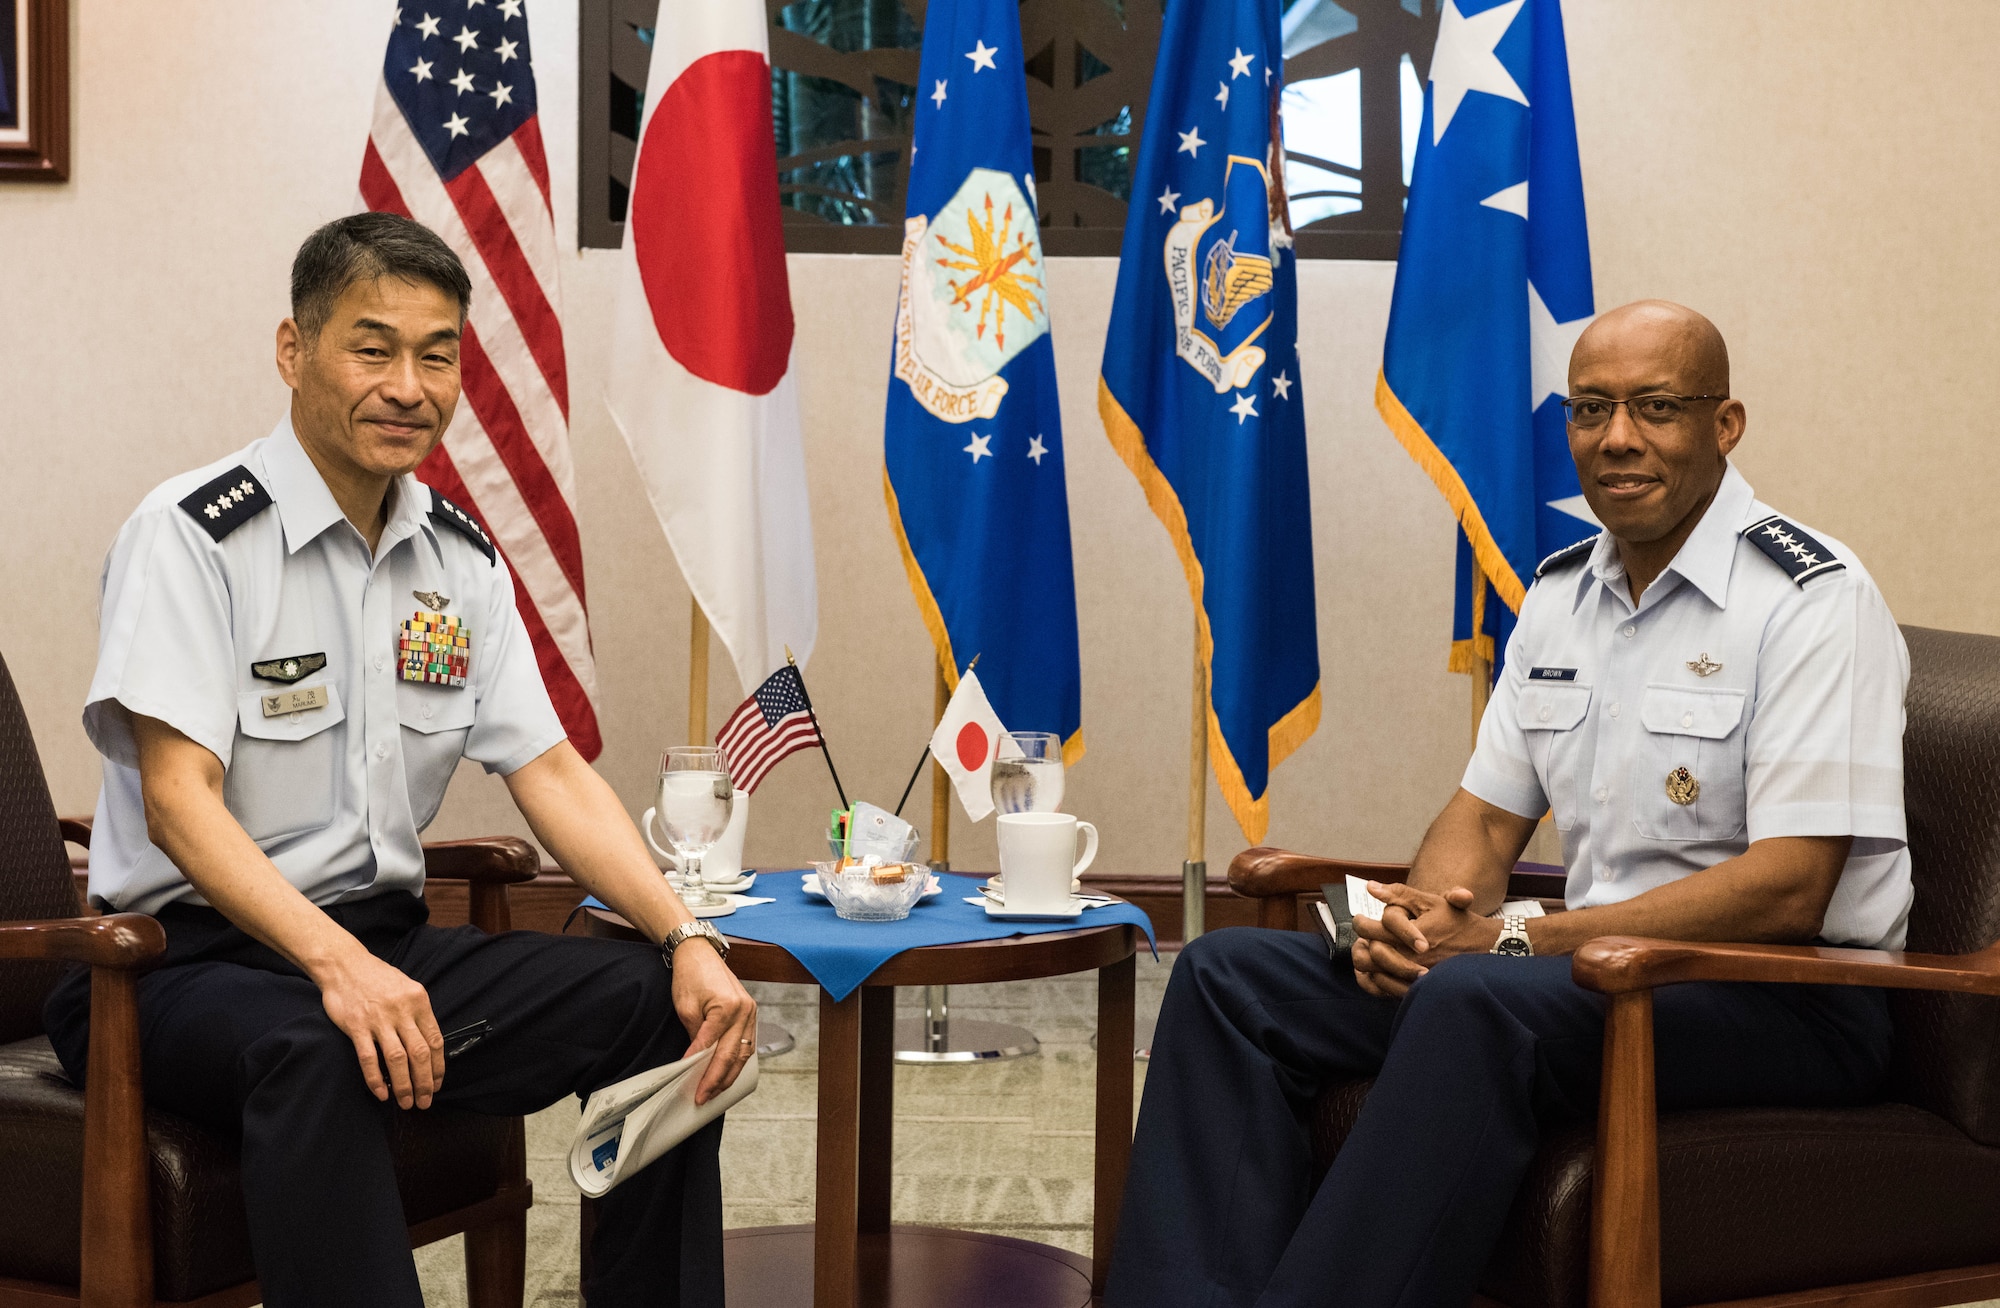 Gen. CQ Brown, Jr., Pacific Air Forces commander, hosted Gen. Yoshinari Marumo, Japanese Air Self-Defense Force chief of staff, at Headquarters PACAF on Joint Base Pearl Harbor-Hickam, Hawaii, Dec. 4, 2018. As part of his trip, Marumo met with PACAF leadership to discuss the PACAF strategy and future engagements. The U.S. and Japan routinely work together to promote security cooperation and support a free and open Indo-Pacific region. (U.S. Air Force photo/Staff Sgt. Hailey Haux)